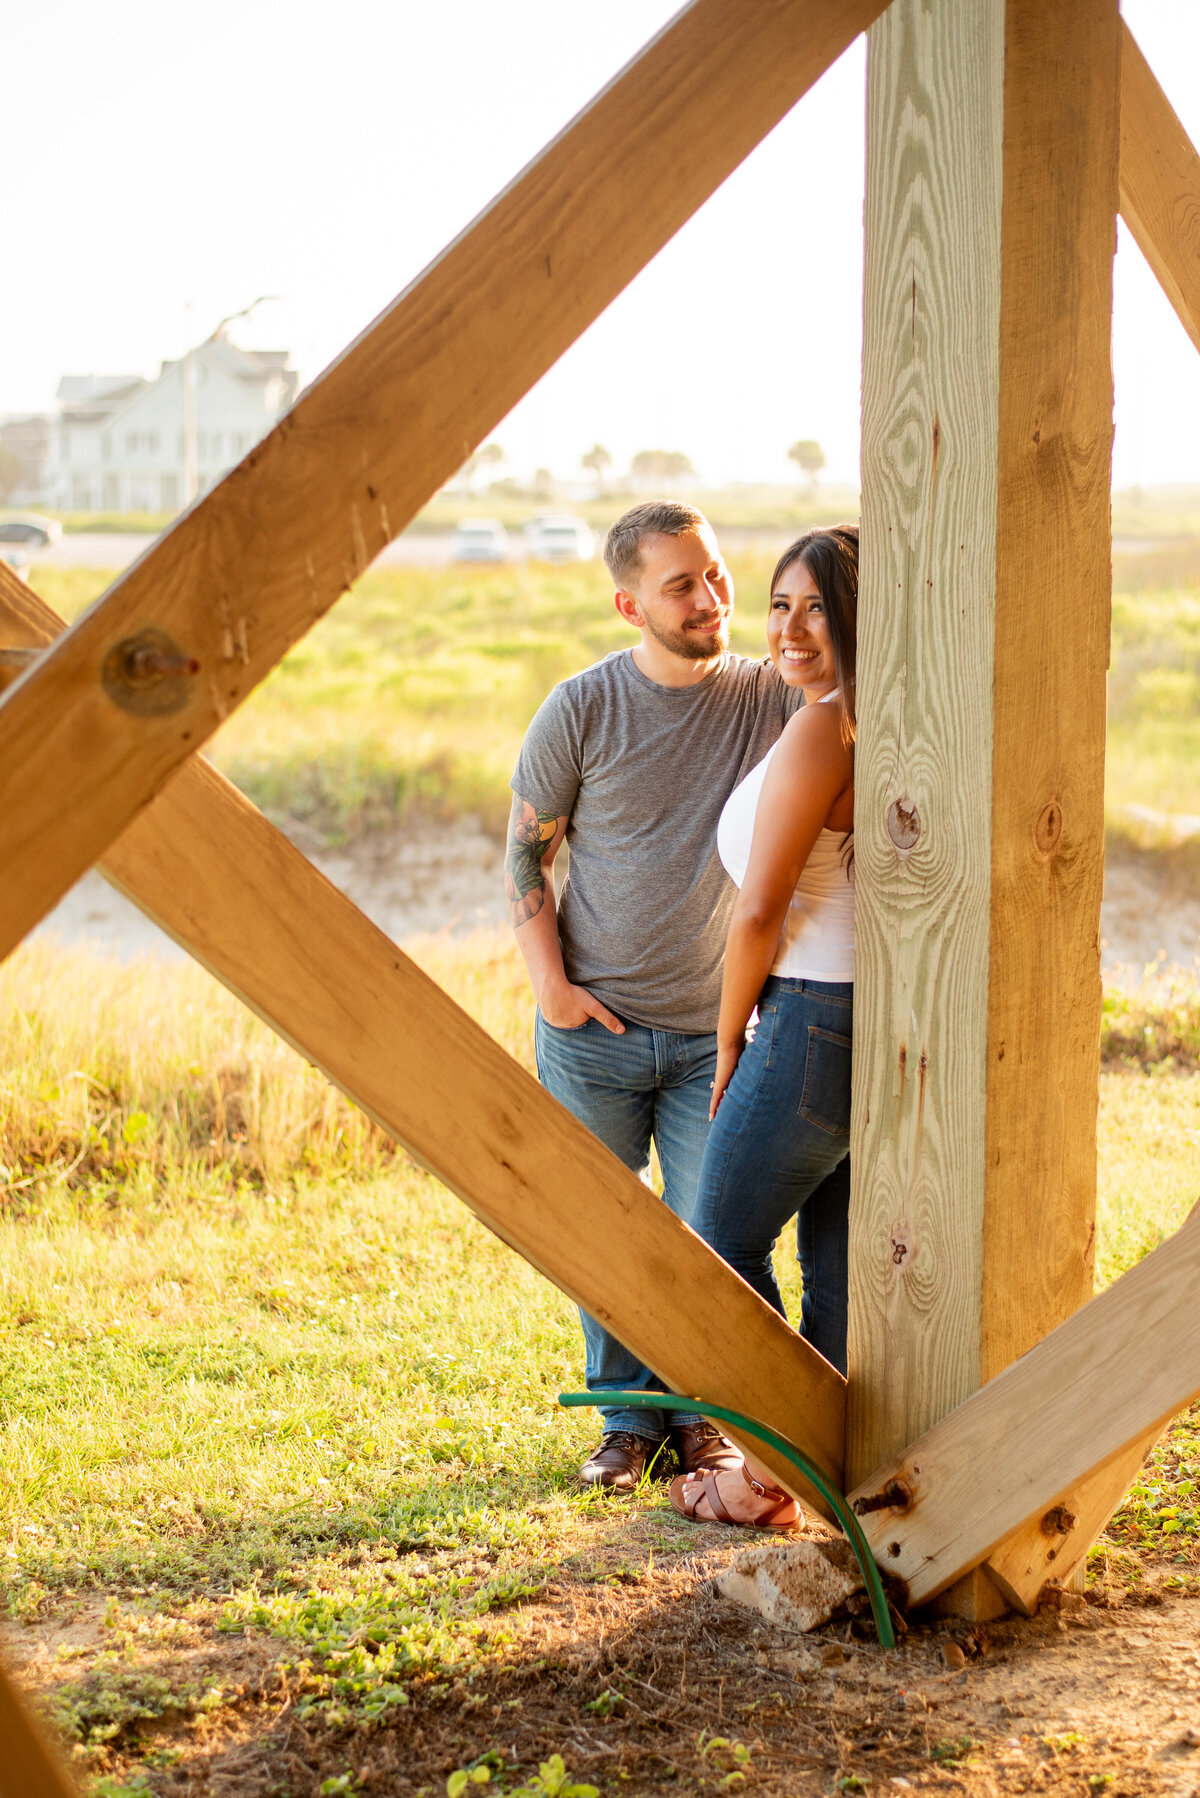 Experience the love and connection of an engagement as this couple leans on a pillar under a pier on the scenic beaches of Galveston, Texas.